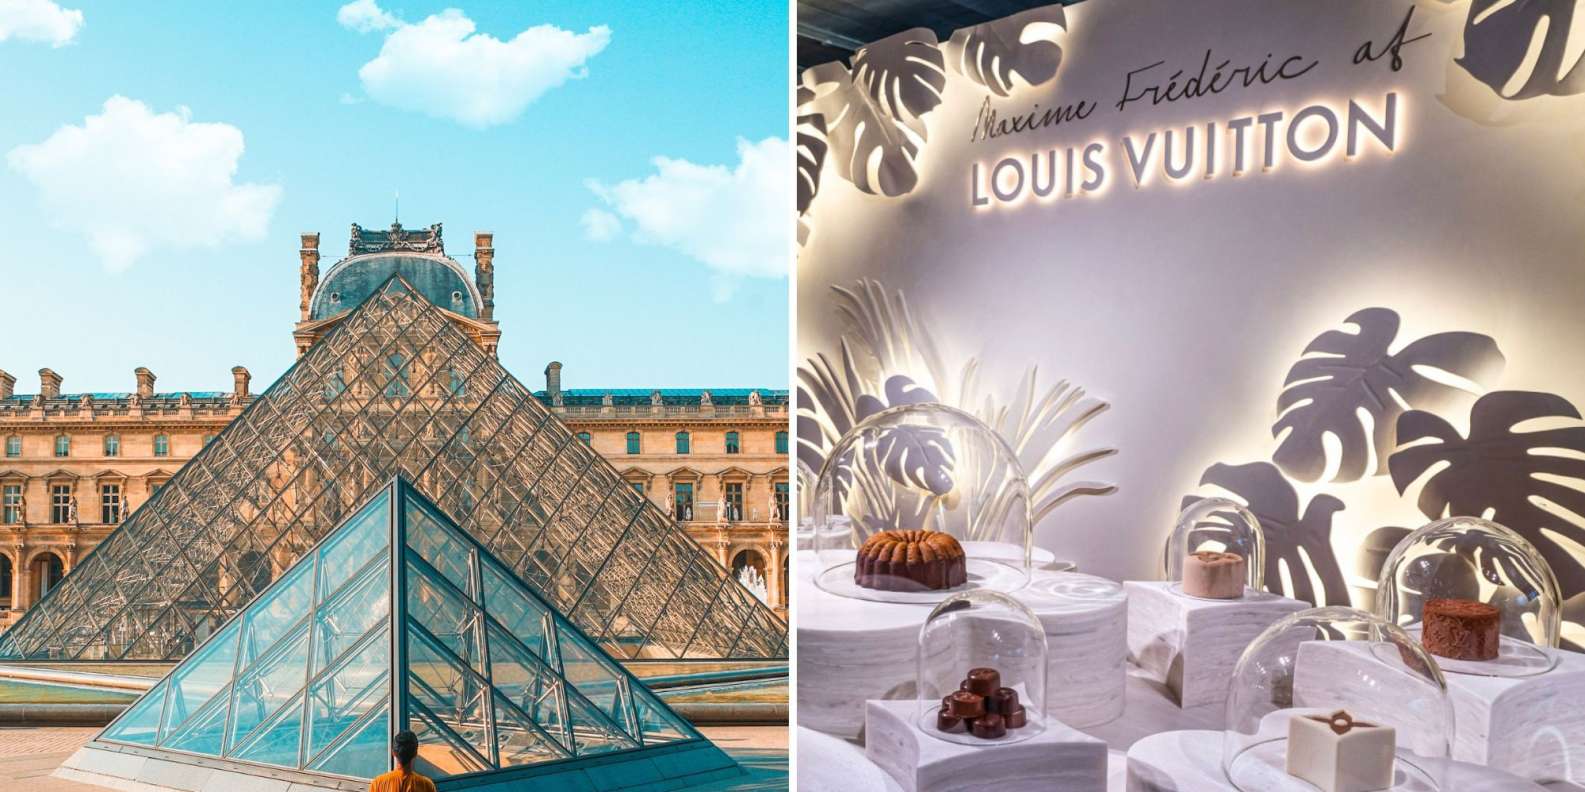 Discovery Louis Vuitton Museum